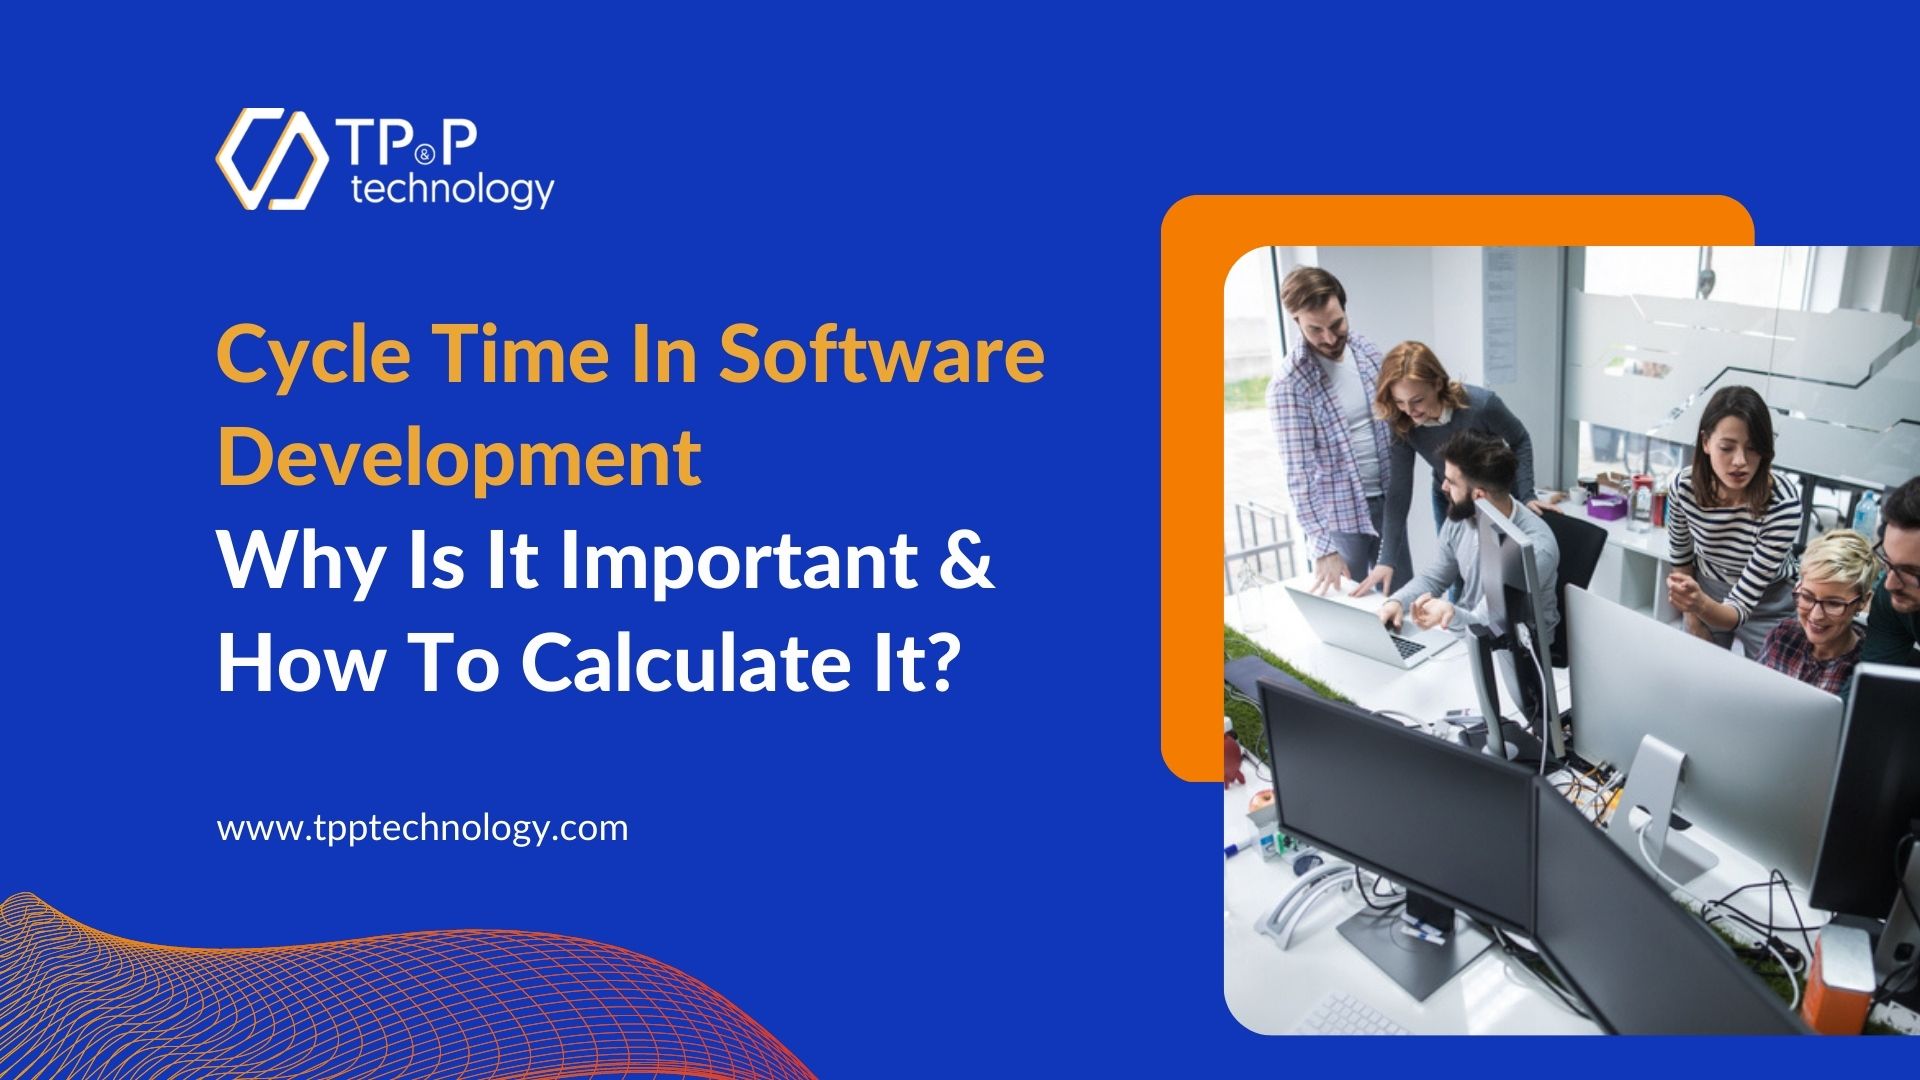 Cycle Time In Software Development Why Is It Important & How To Calculate It?